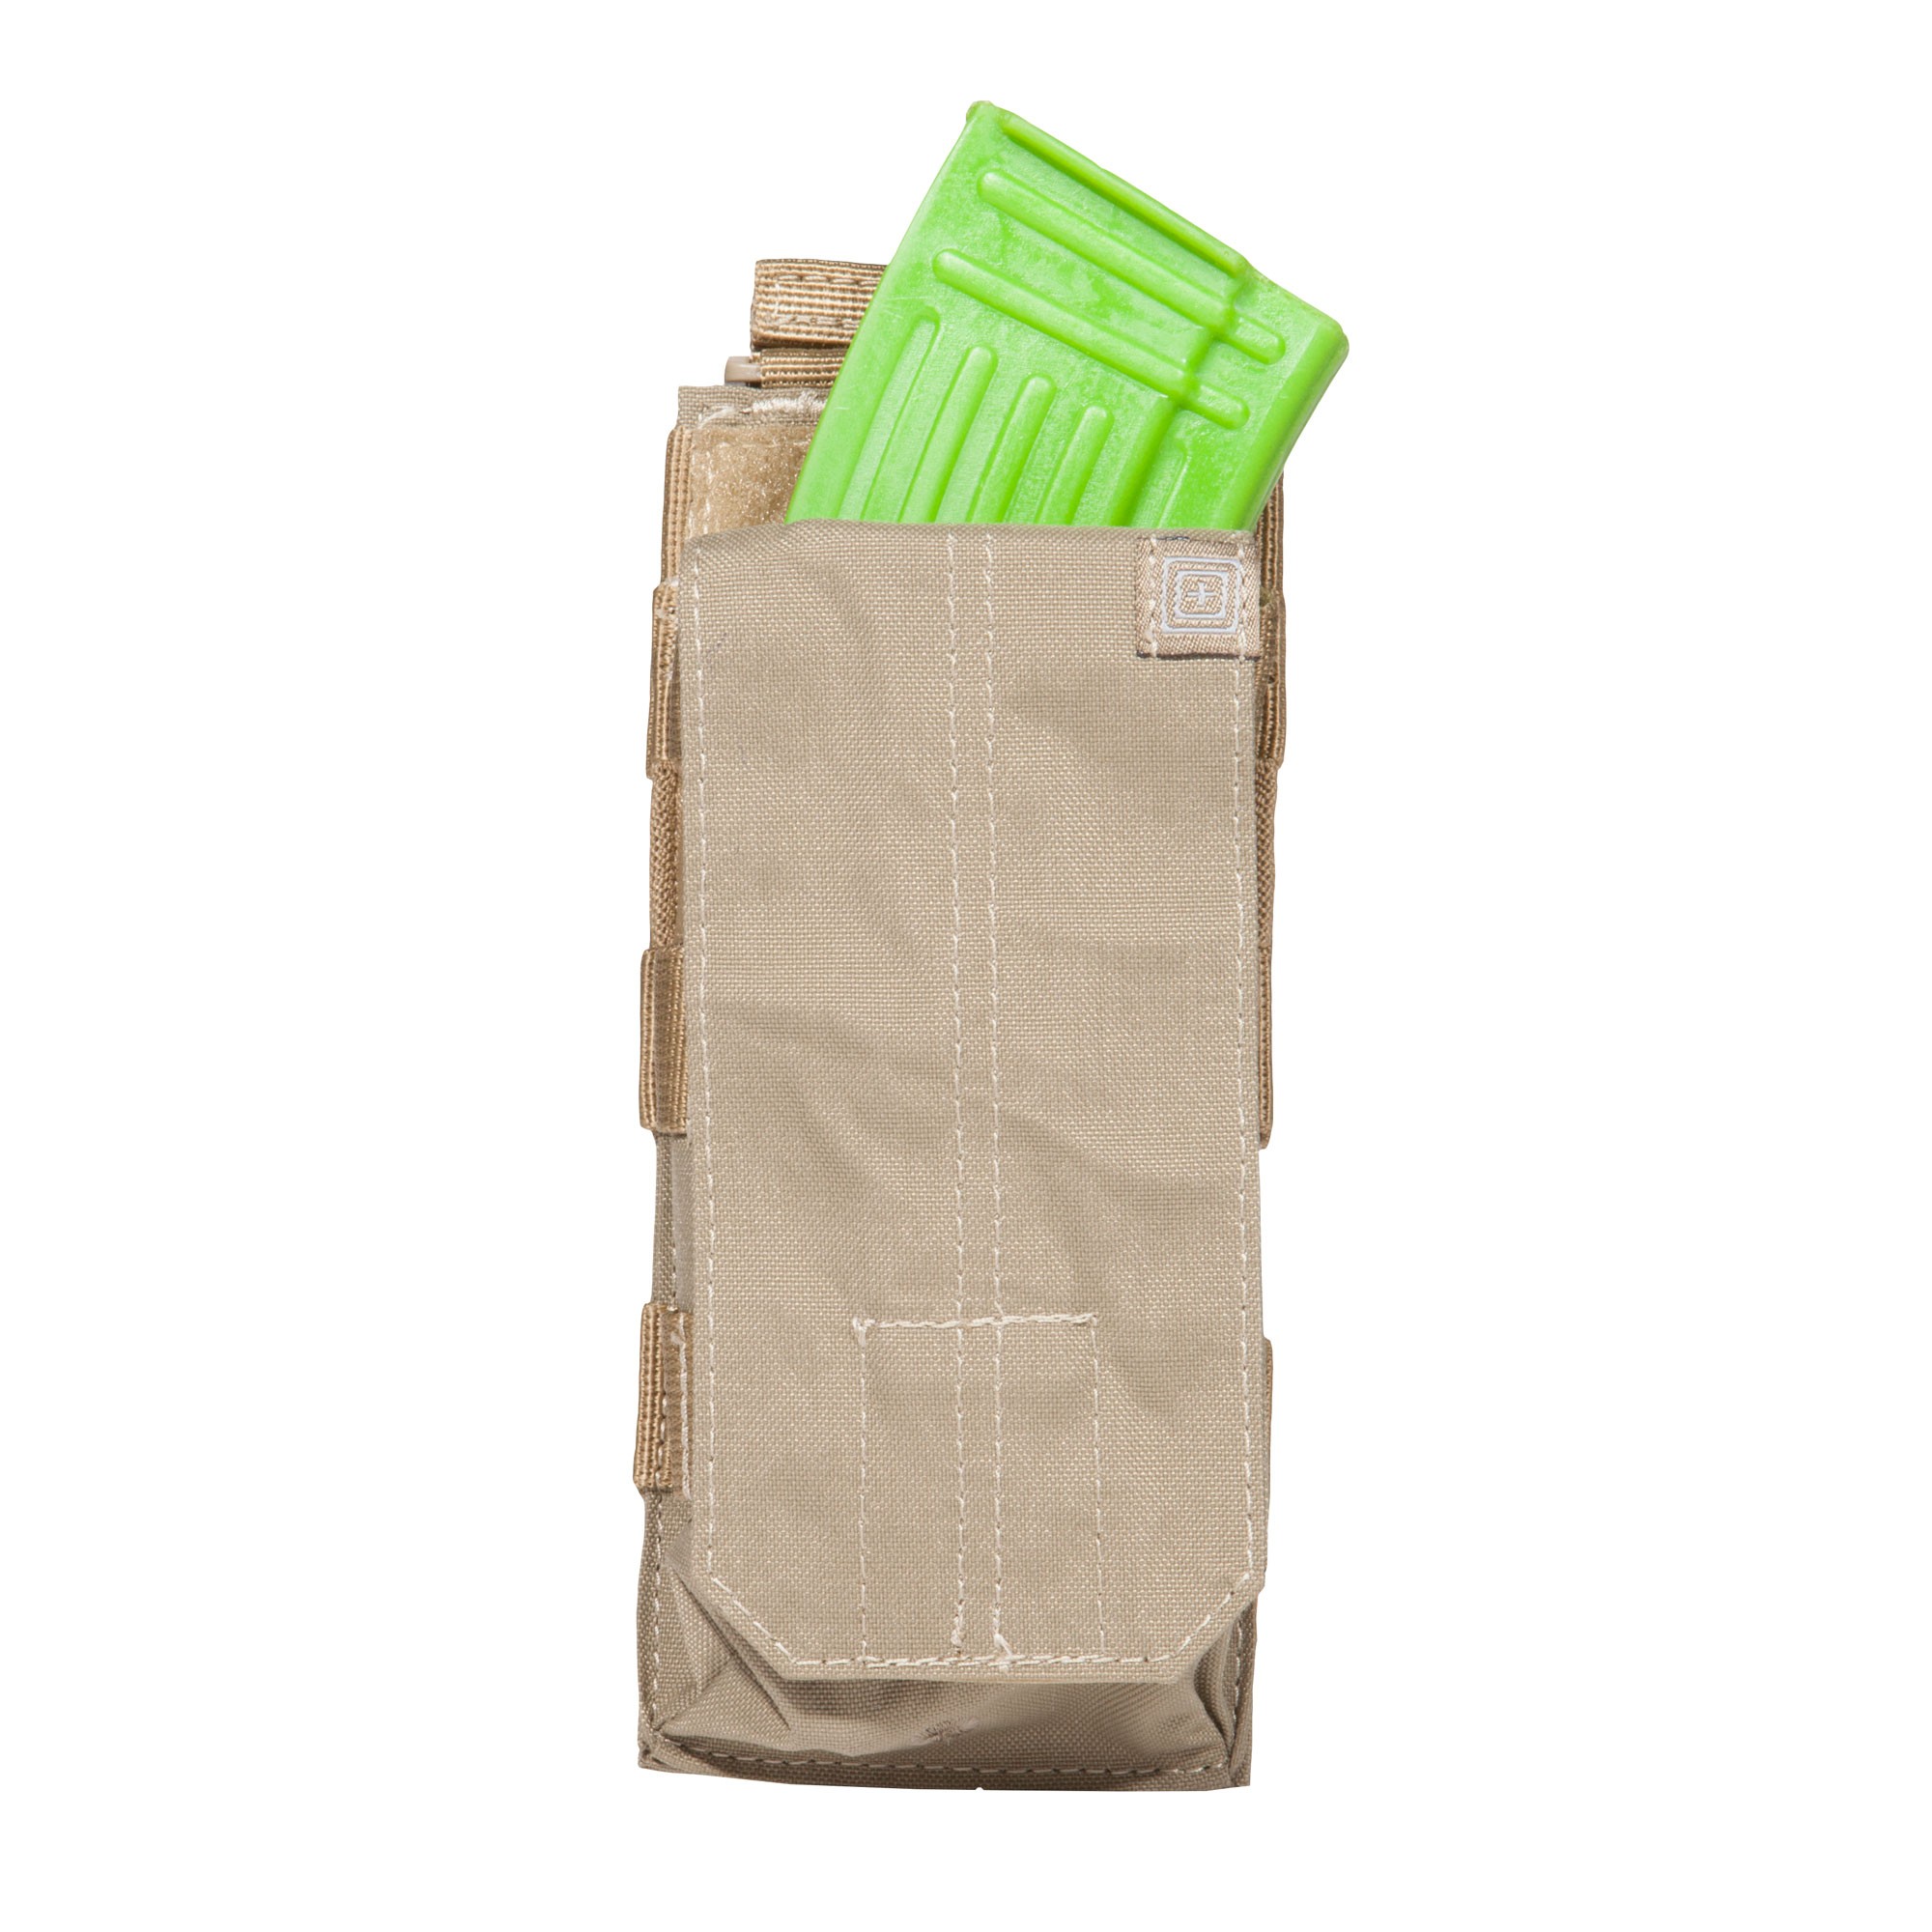 5.11 AK Bungee/Cover Single Pouch